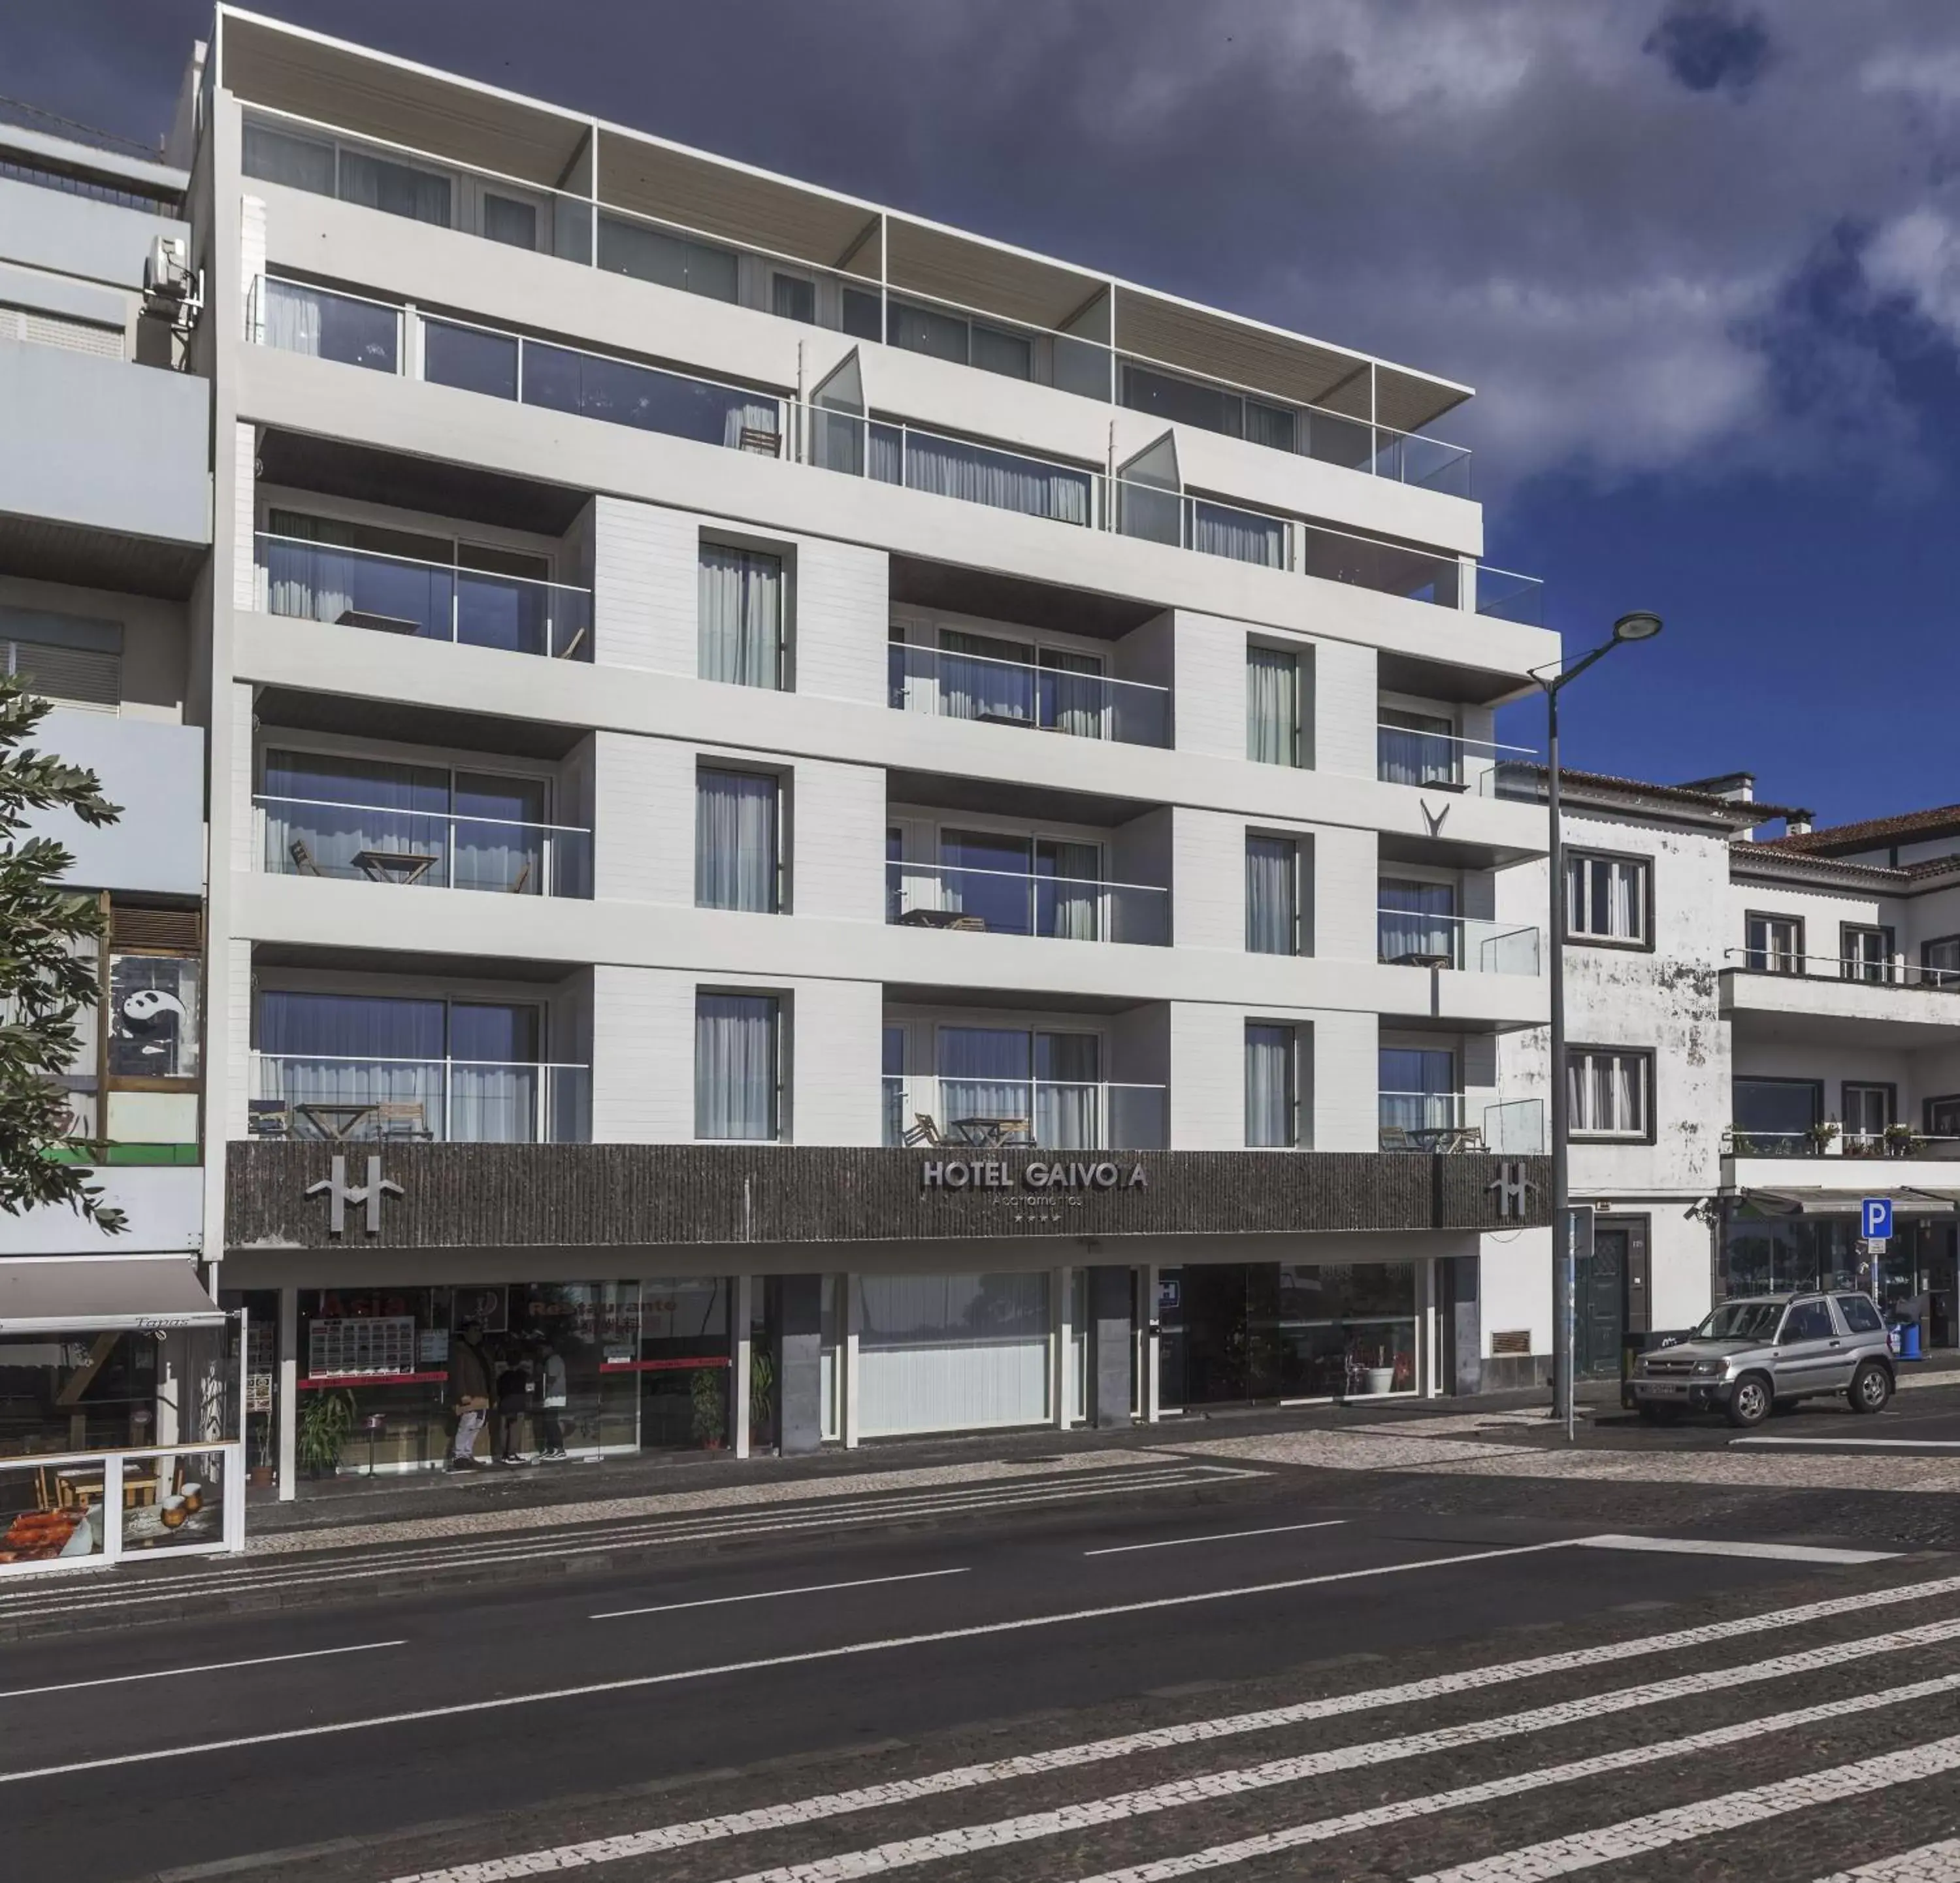 Property Building in Hotel Gaivota Azores